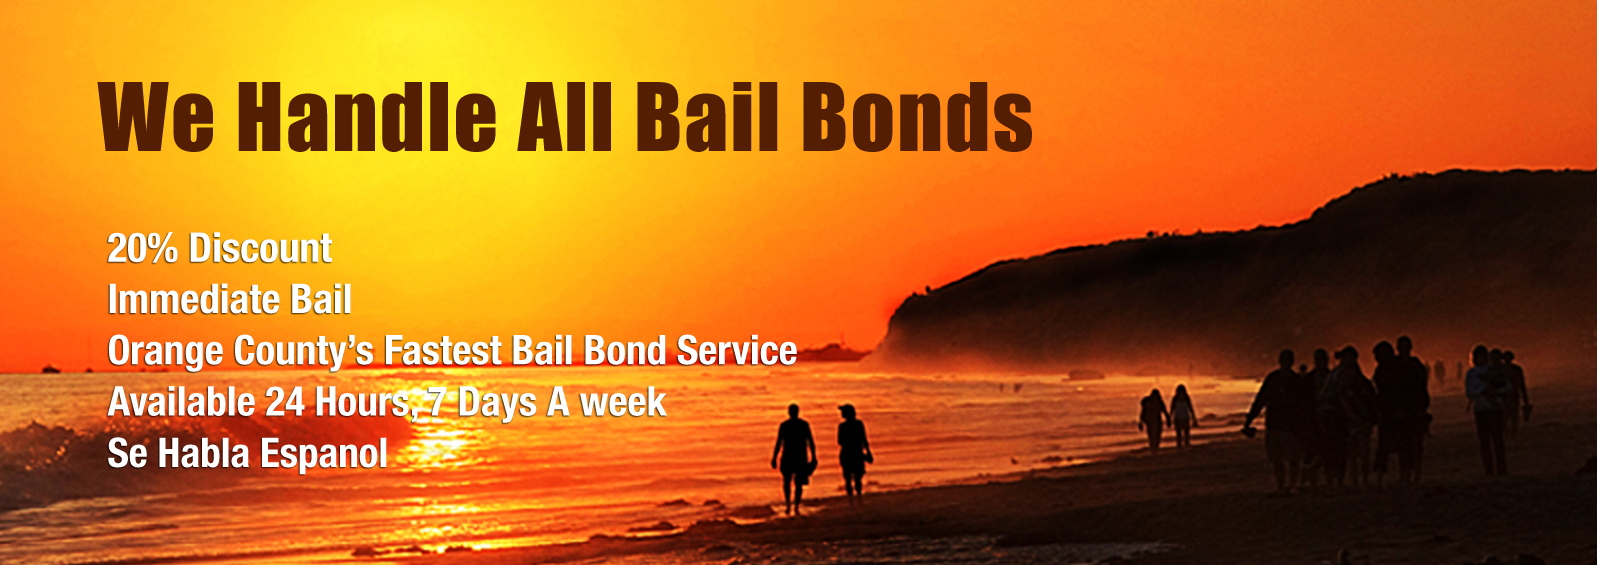 Santa Ana Bail Bonds Services are proudly serving the following cities. We are also serving San Diego County & Los Angeles County